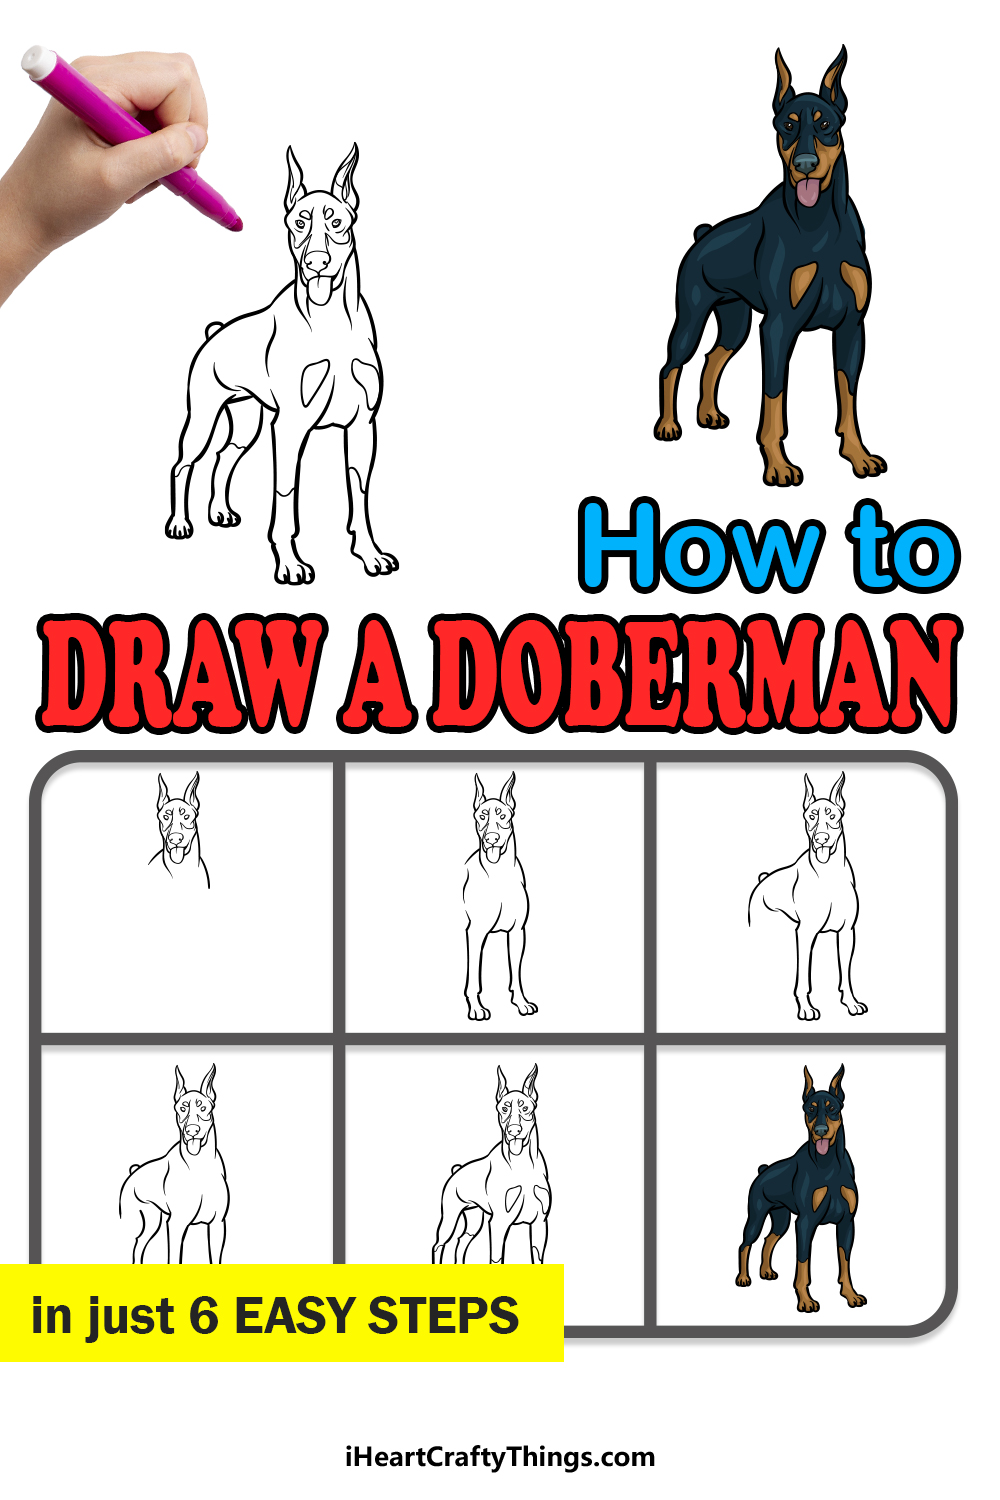 how to draw a Dobermann in 6 easy steps